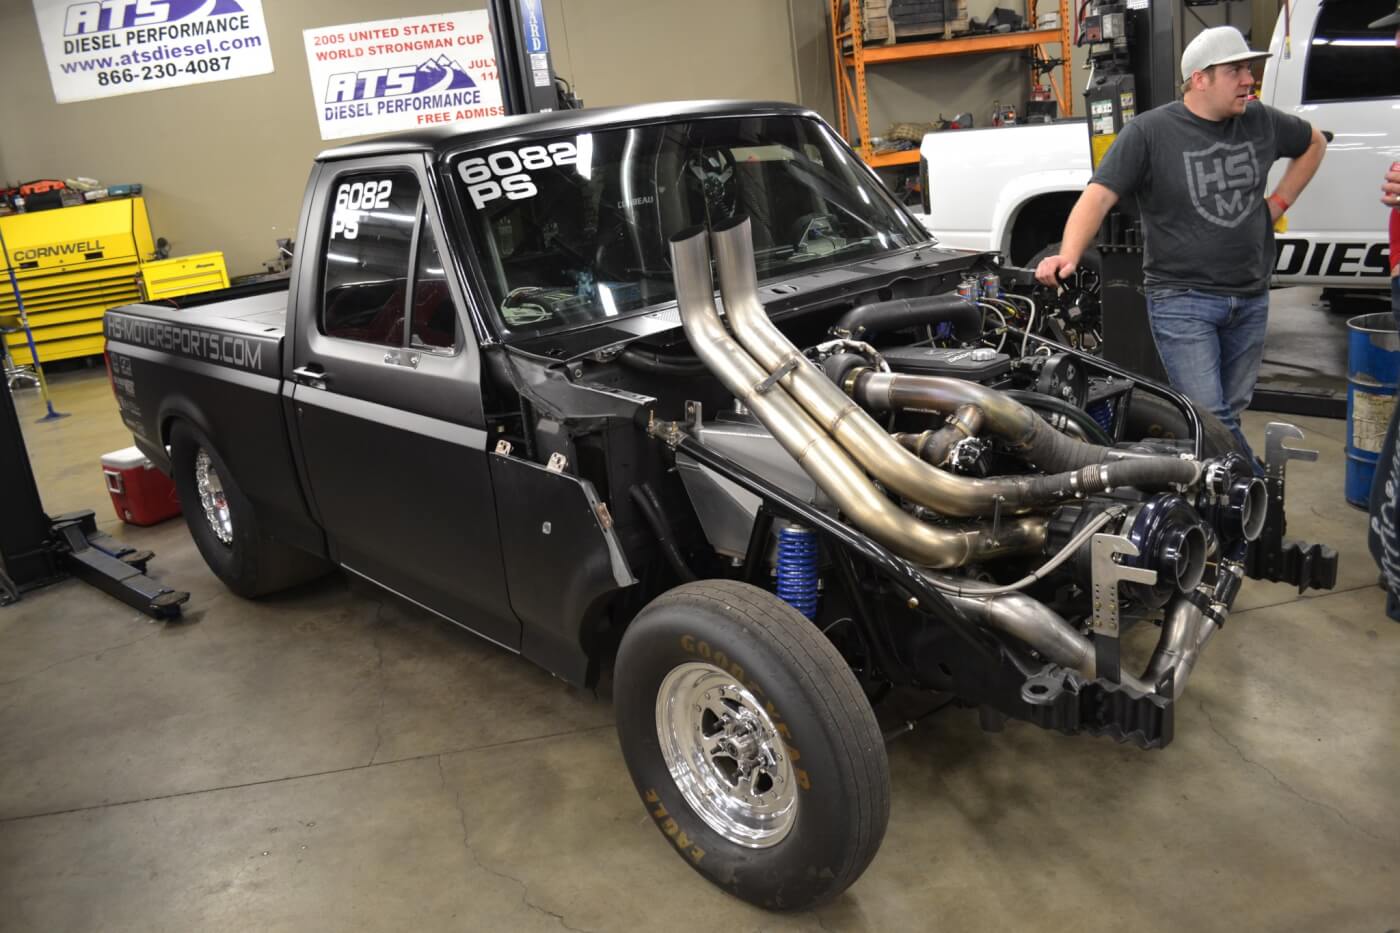 6. H&S Performance is currently testing a 4R Package in their ultra-trick Lightning drag truck, which has run high 8-second passes in the quarter mile and made well over 1,200 rwhp on a chassis dyno.